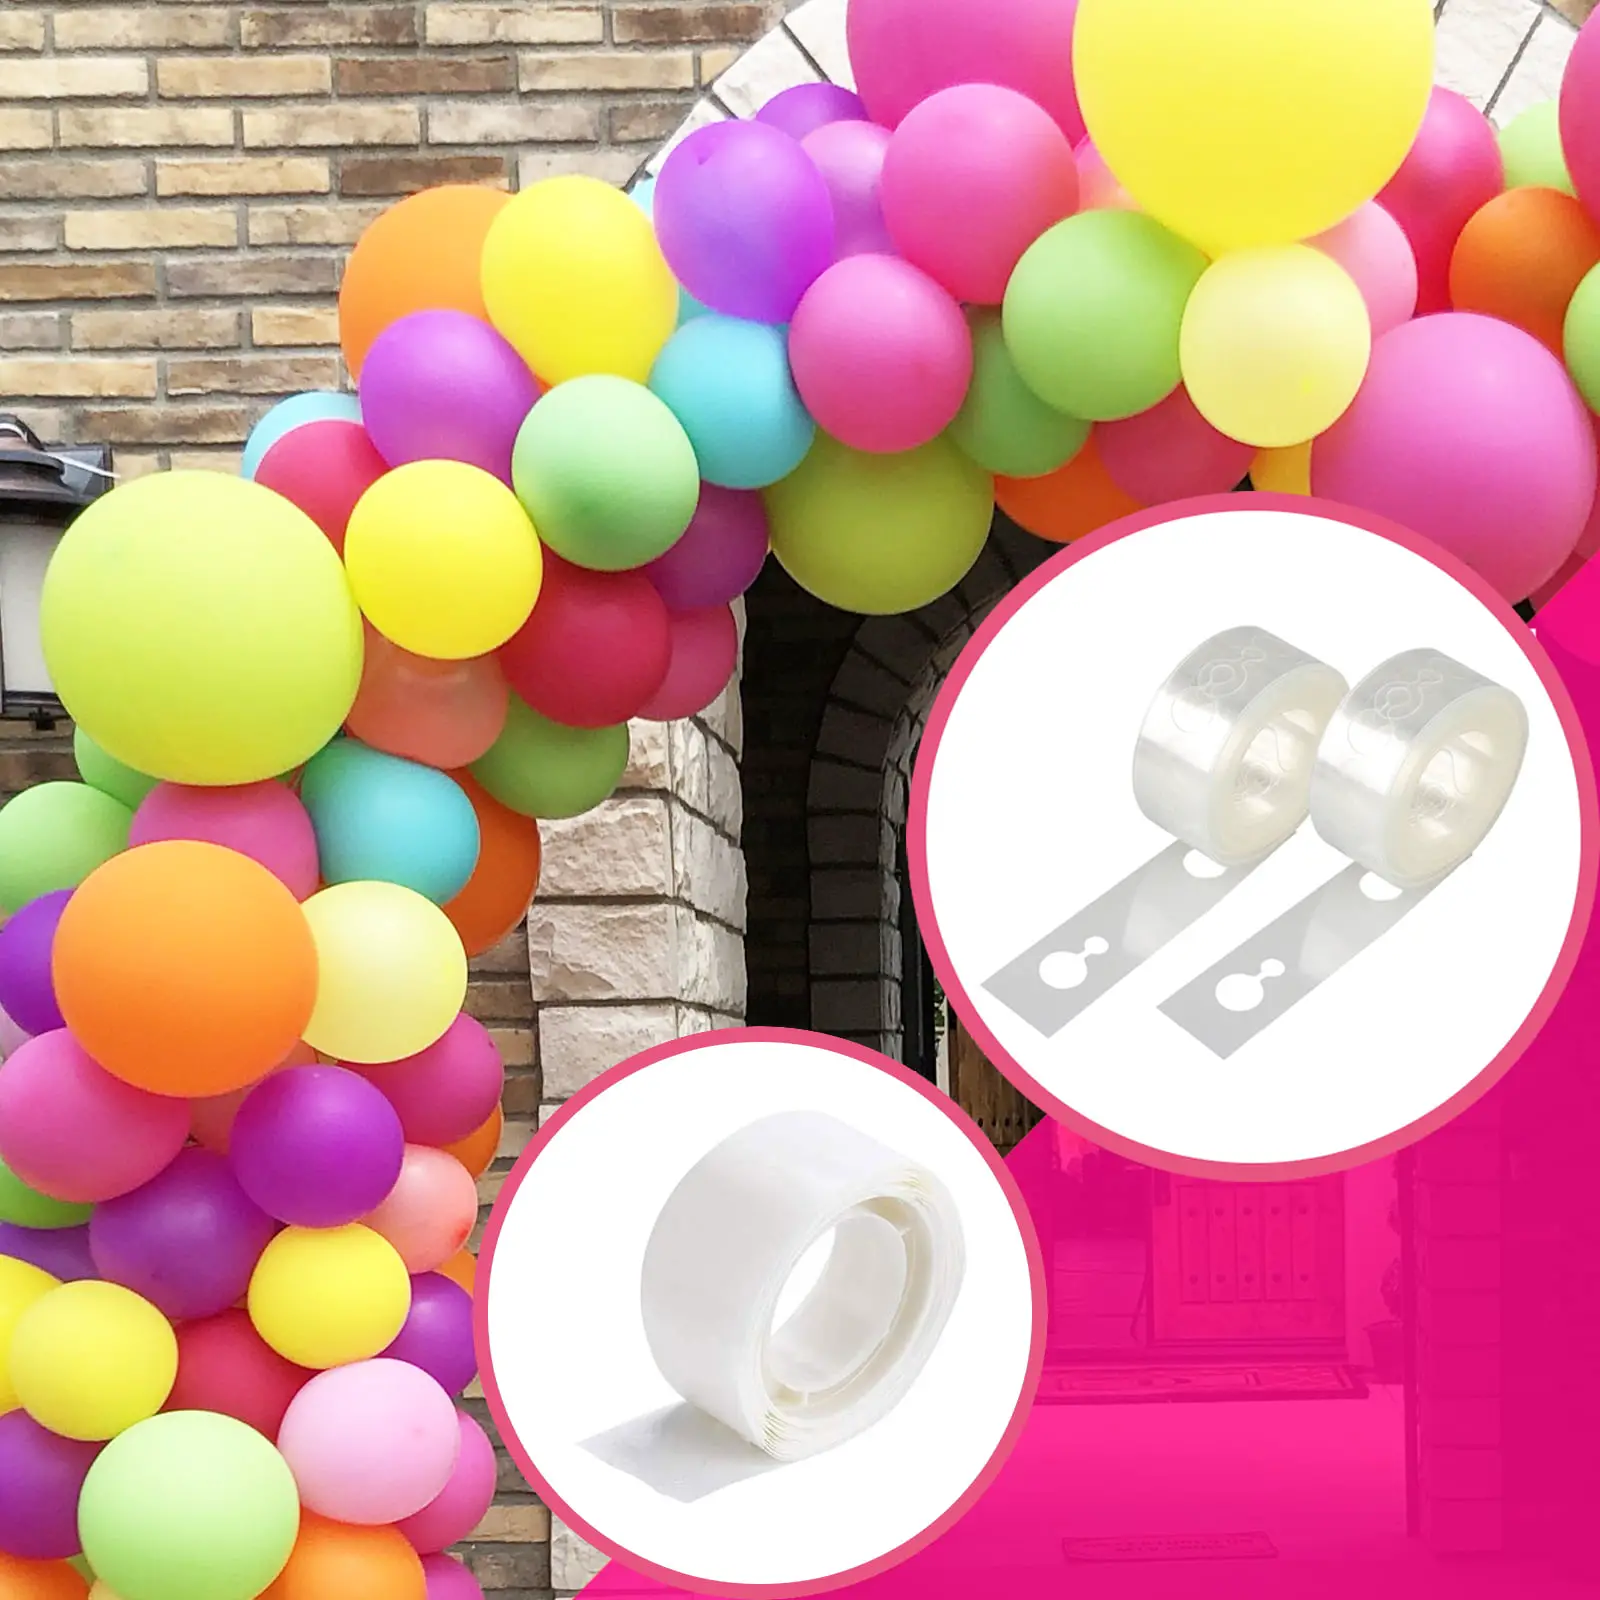 How To Use Glue Dots For Balloons